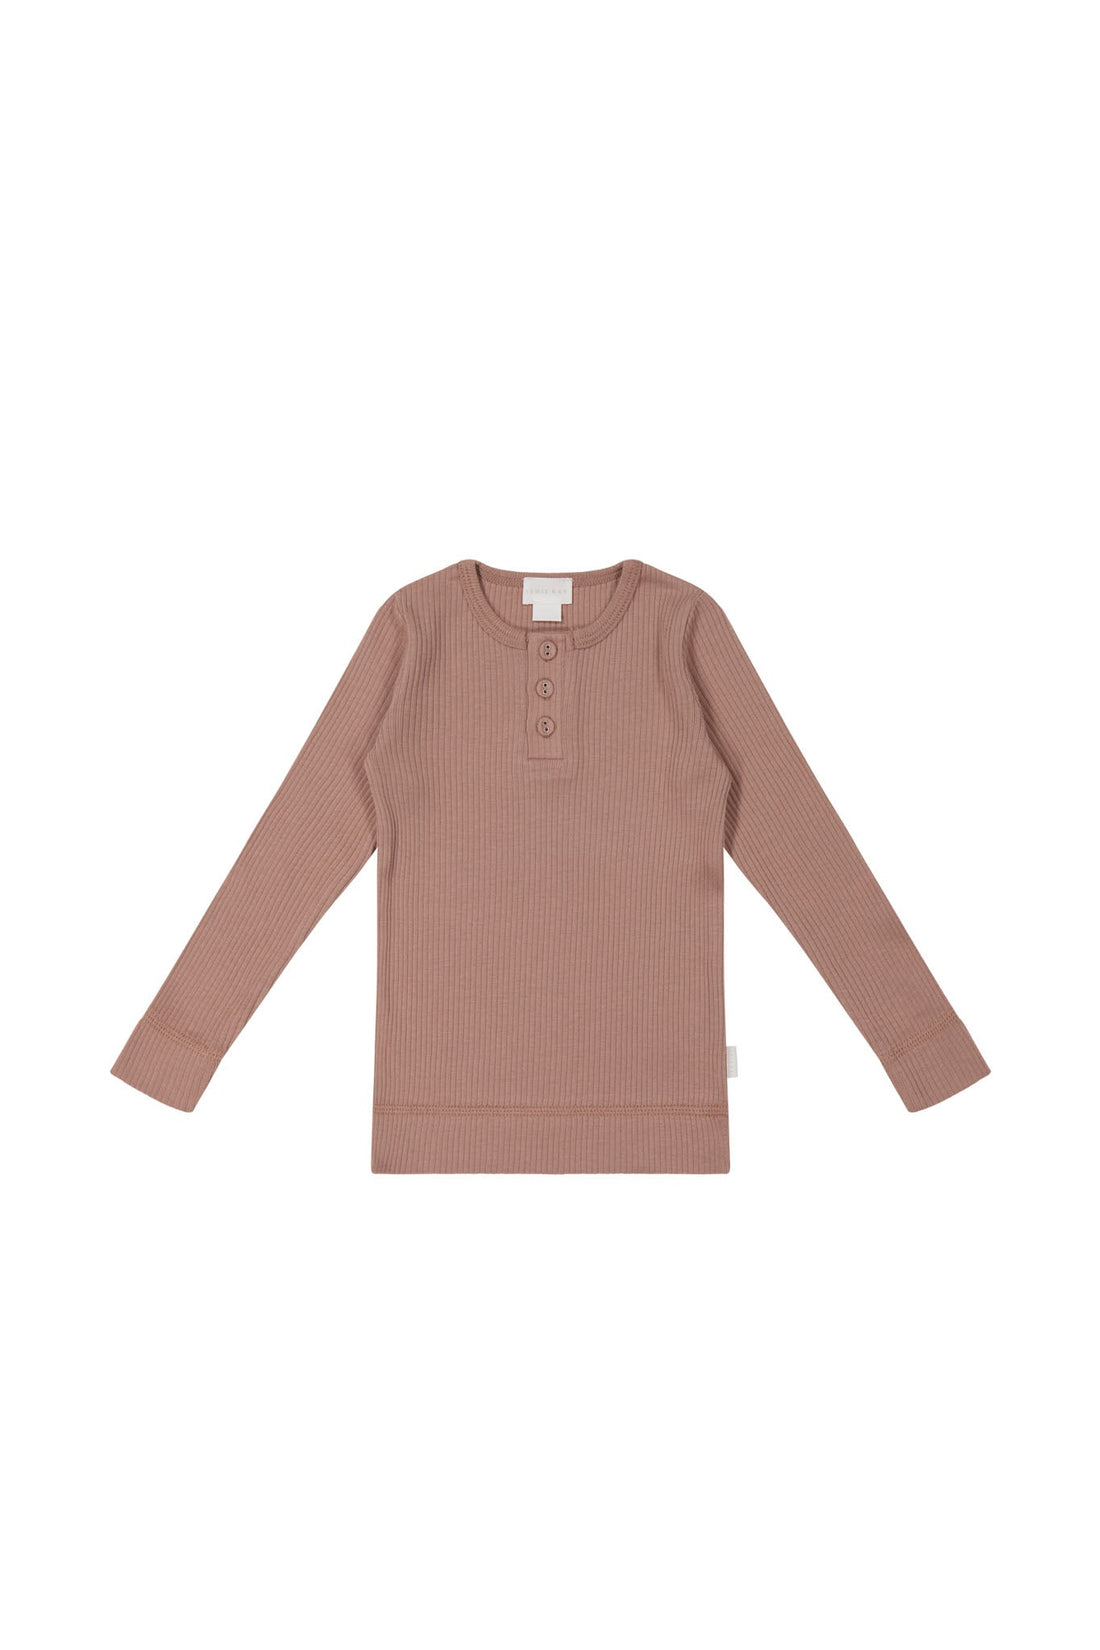 Organic Cotton Modal Long Sleeve Henley - Powder Childrens Top from Jamie Kay USA